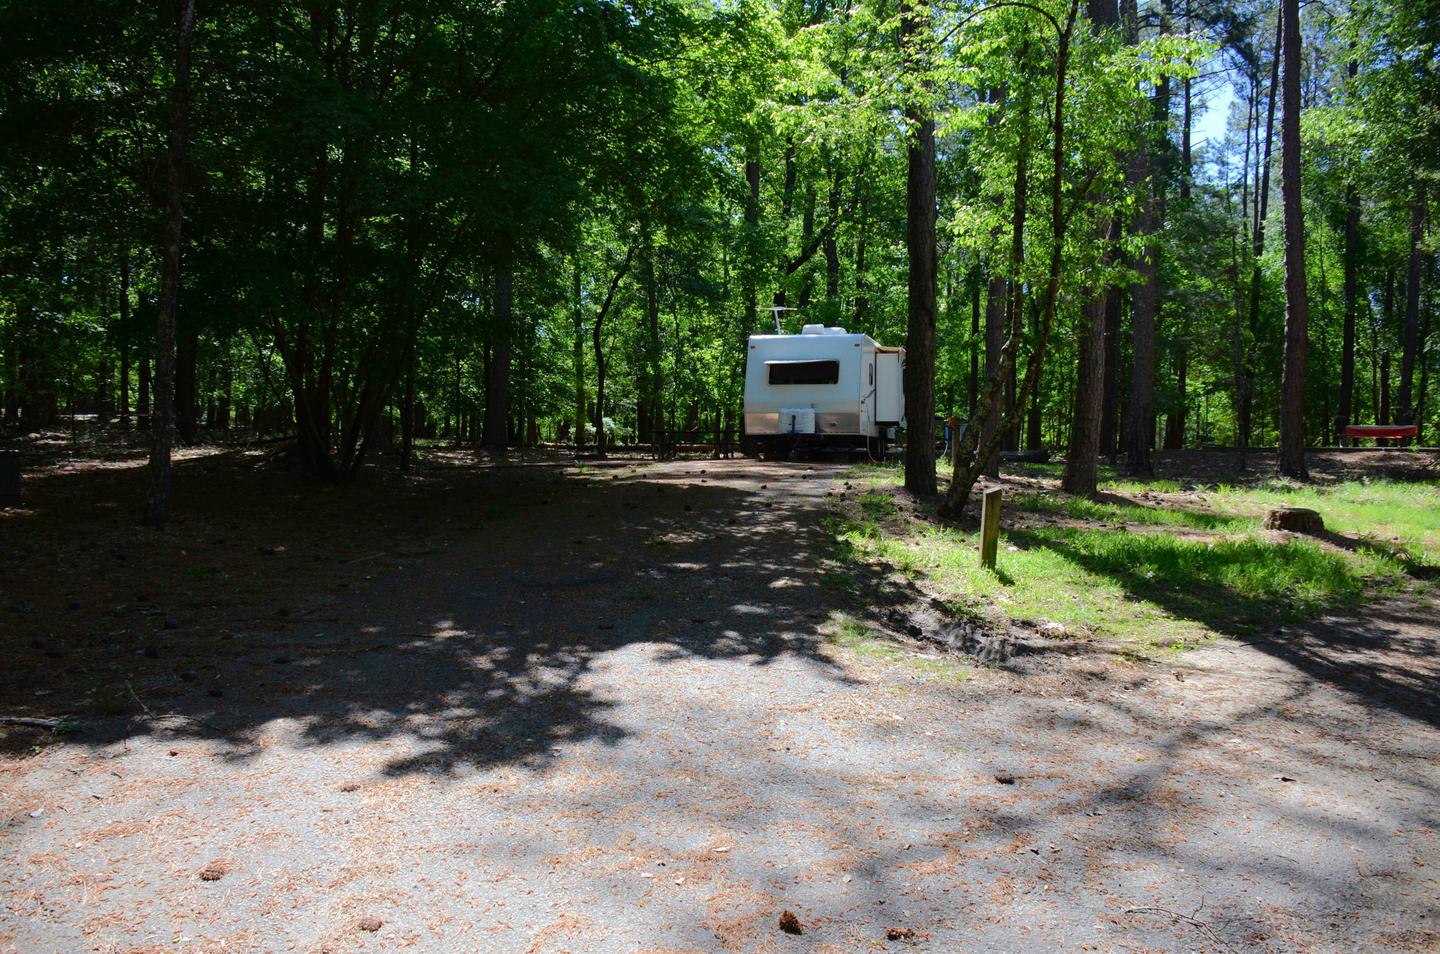 Driveway entrance angle/slope, tree branch clearance.McKinney Campground, campsite 66.